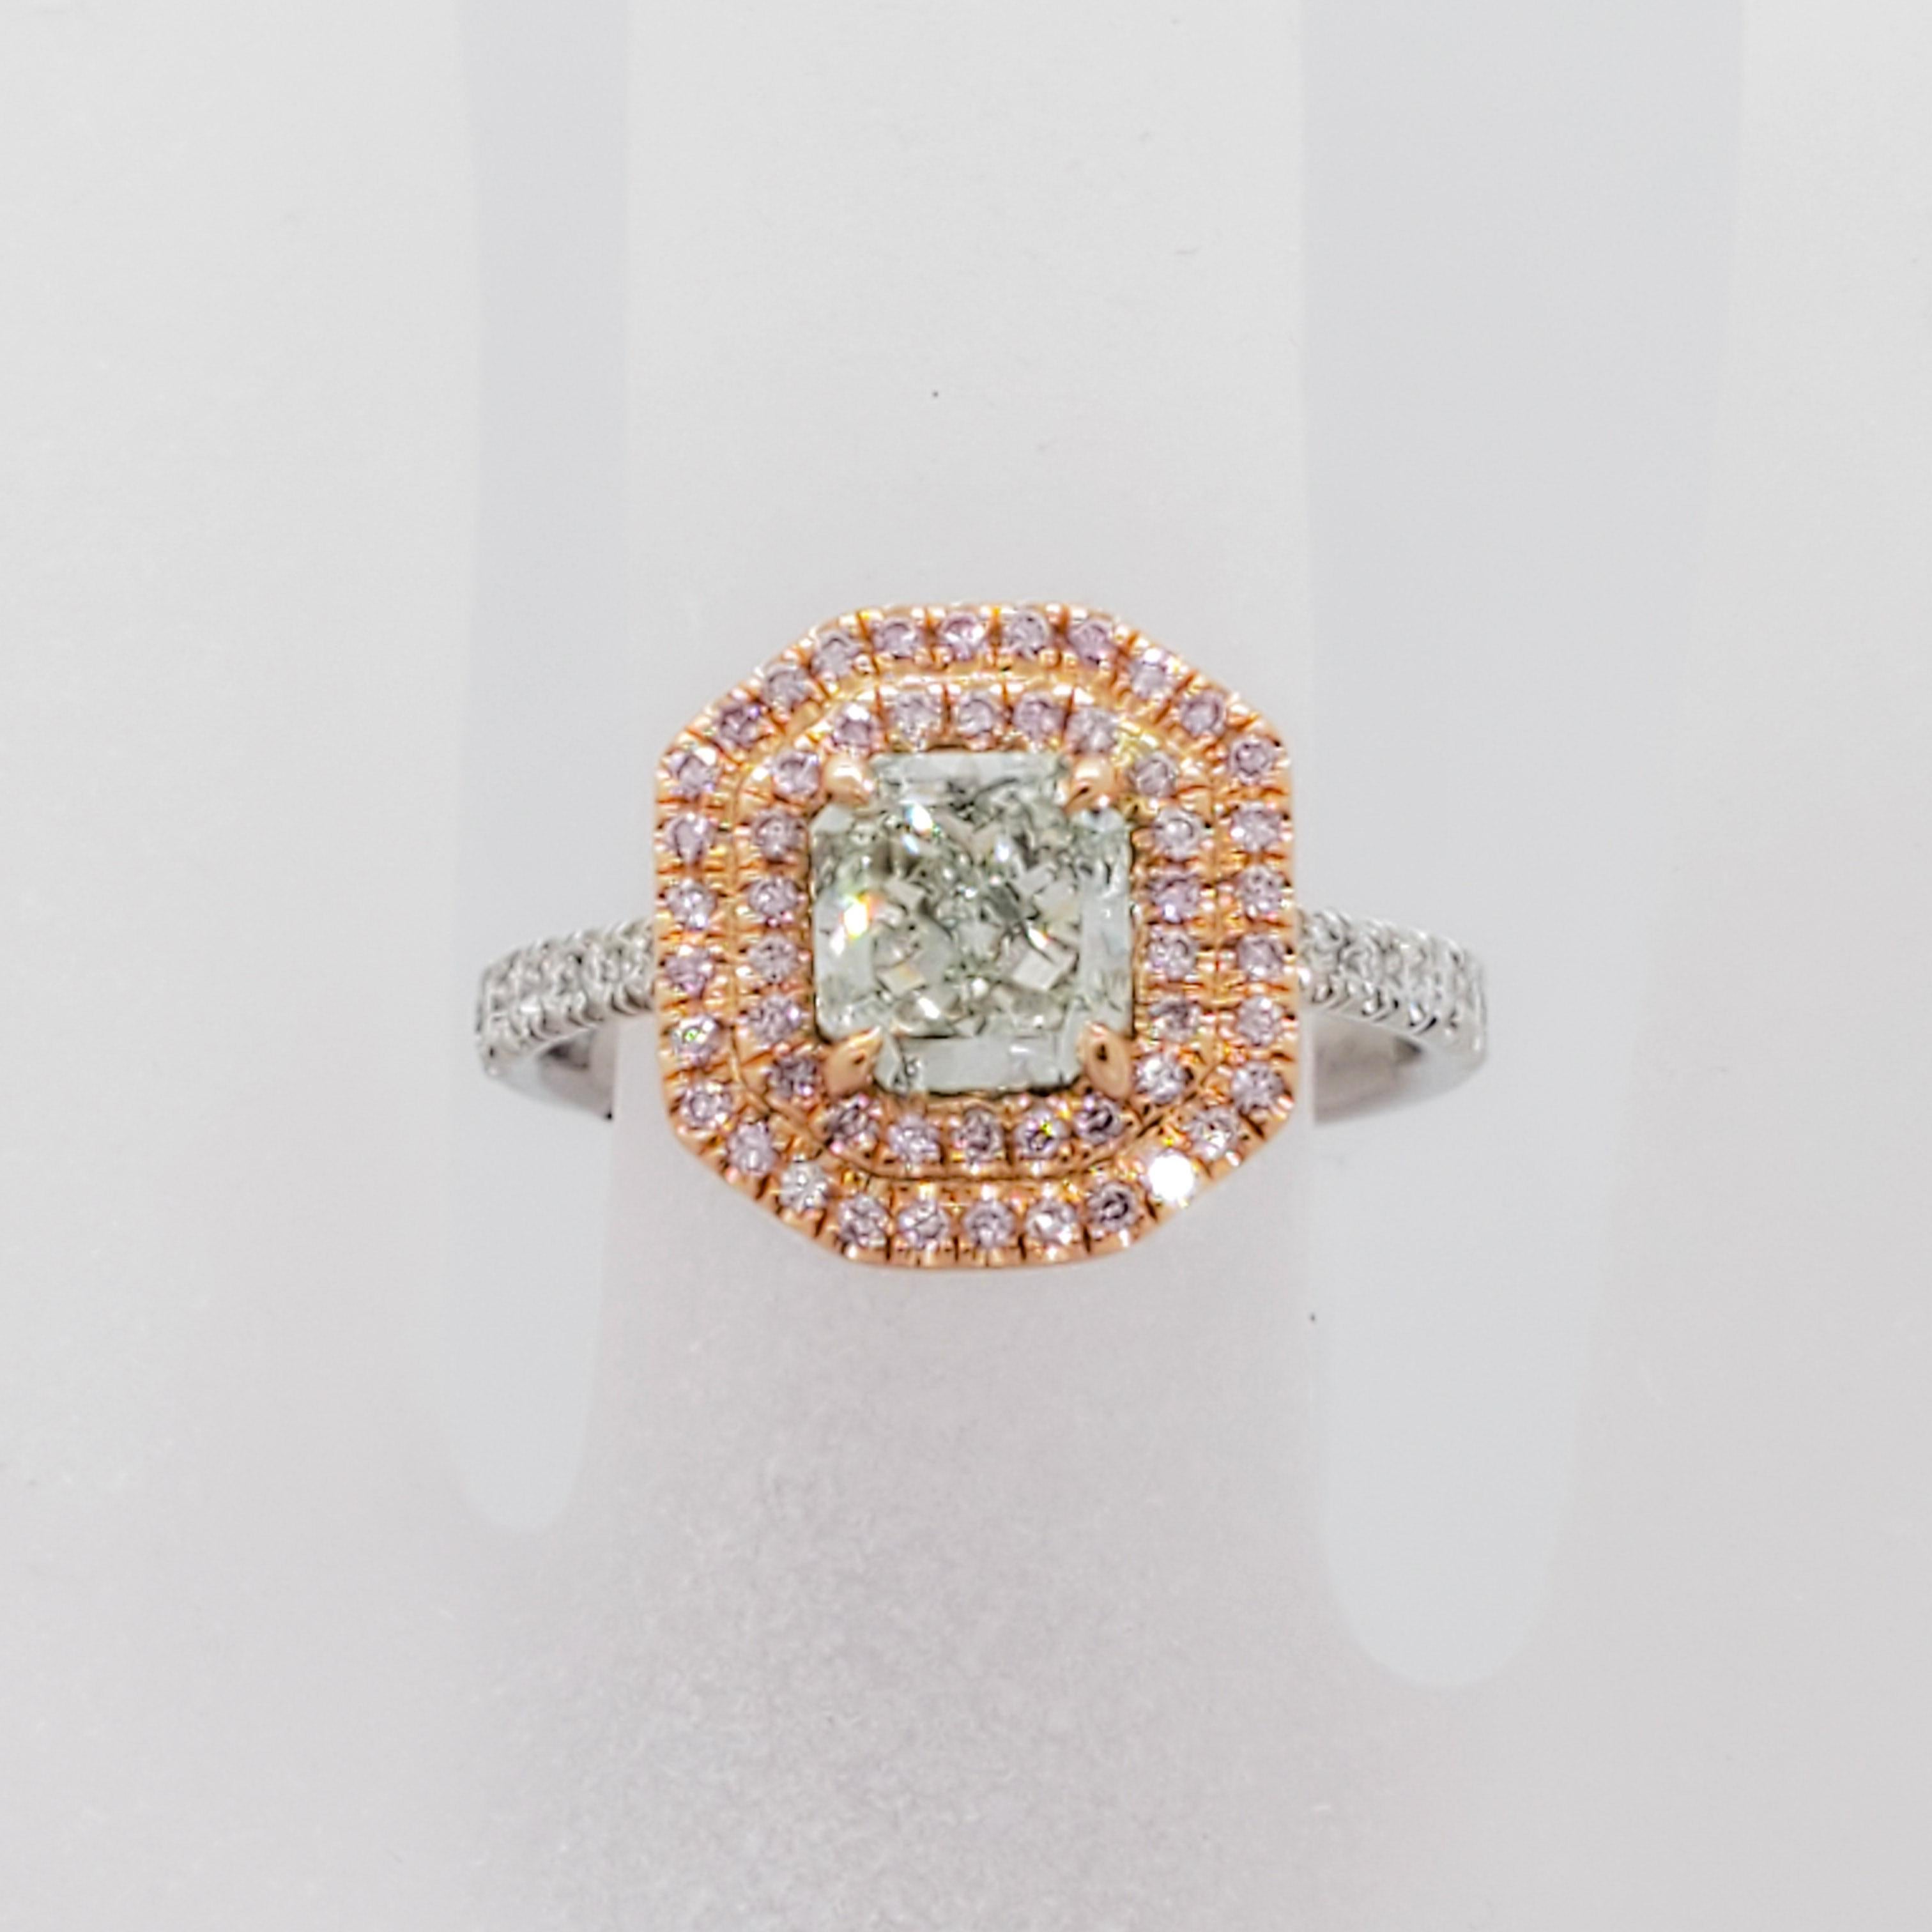 Astounding 1.10 ct. fancy green diamond radiant, VS2 clarity.  Surrounding the green diamond are 2 rows of 0.25 ct. of natural bright pink diamond rounds in a handmade platinum and 18k rose gold mounting.  Ring size 6.25.  Excellent condition. GIA